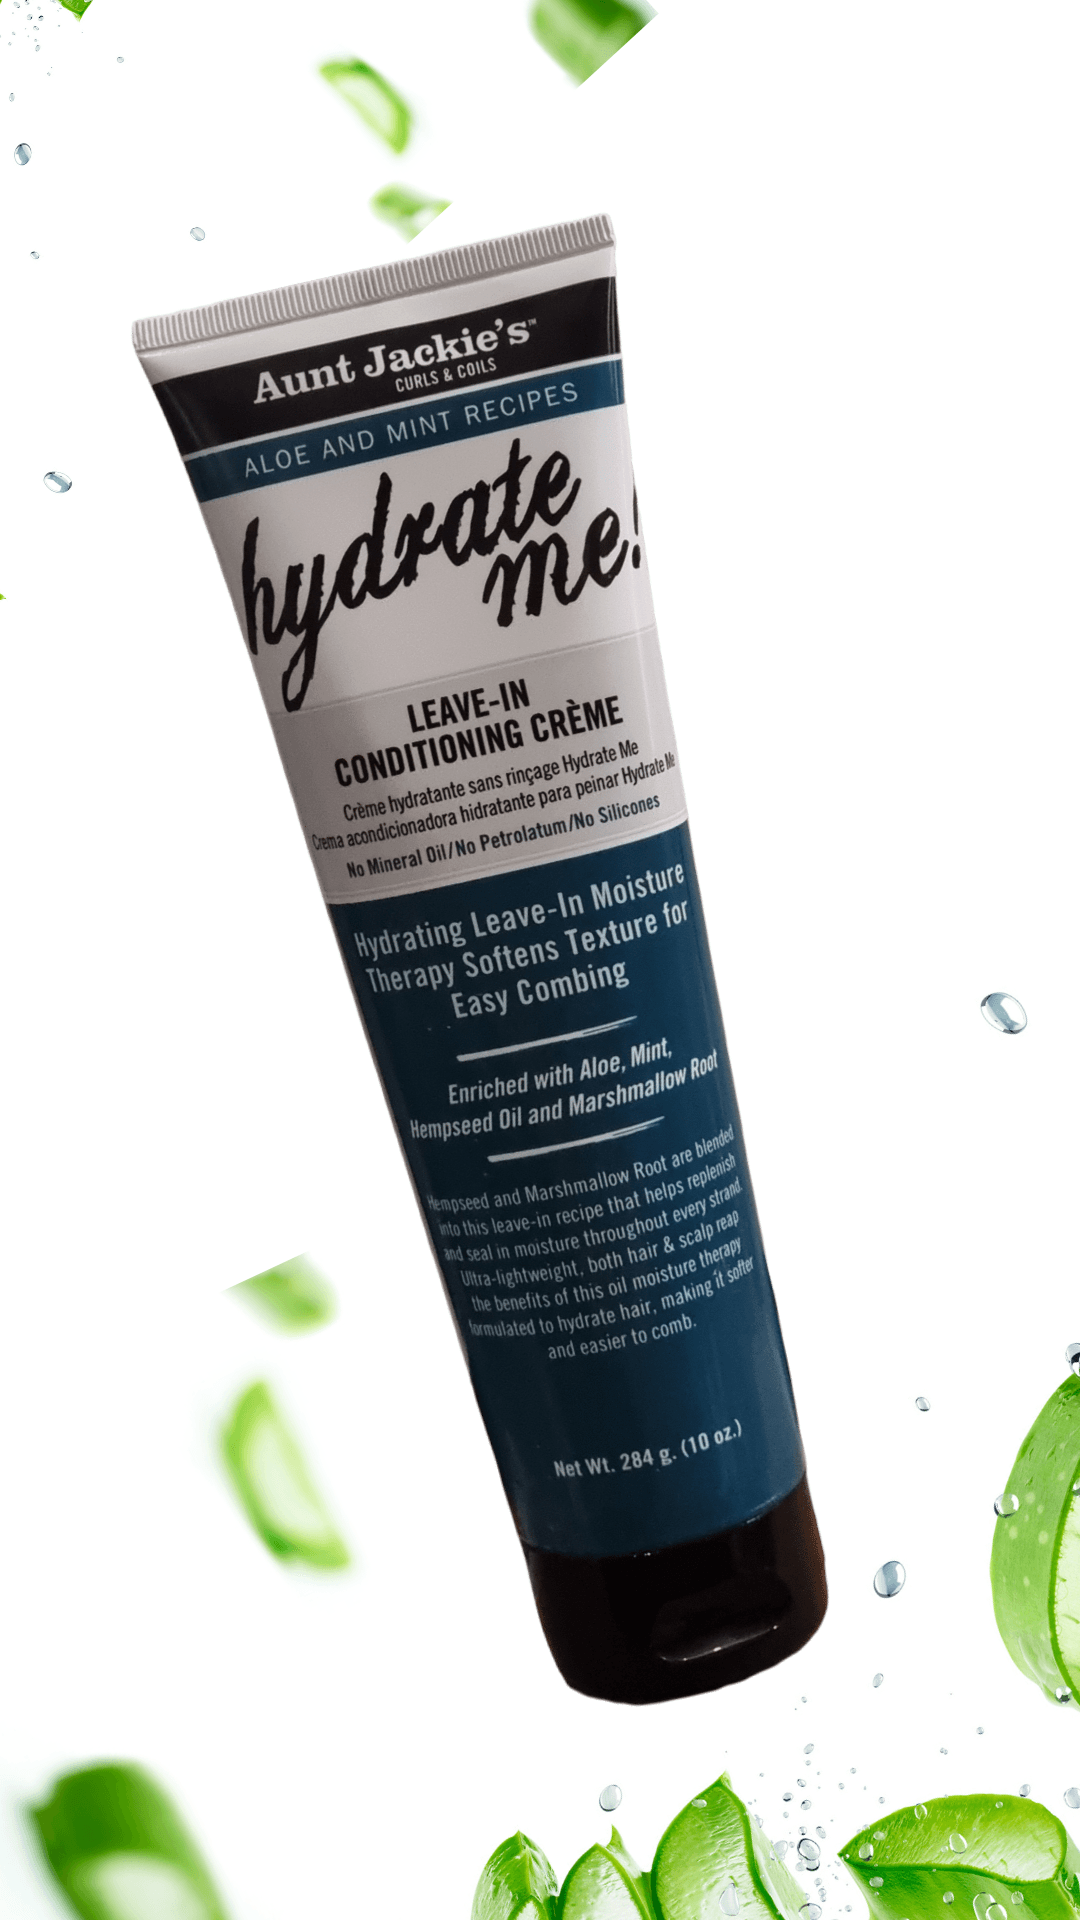 Aunt Jackie's Hydrate Me Leave-In Conditioning Creme - LocsNco